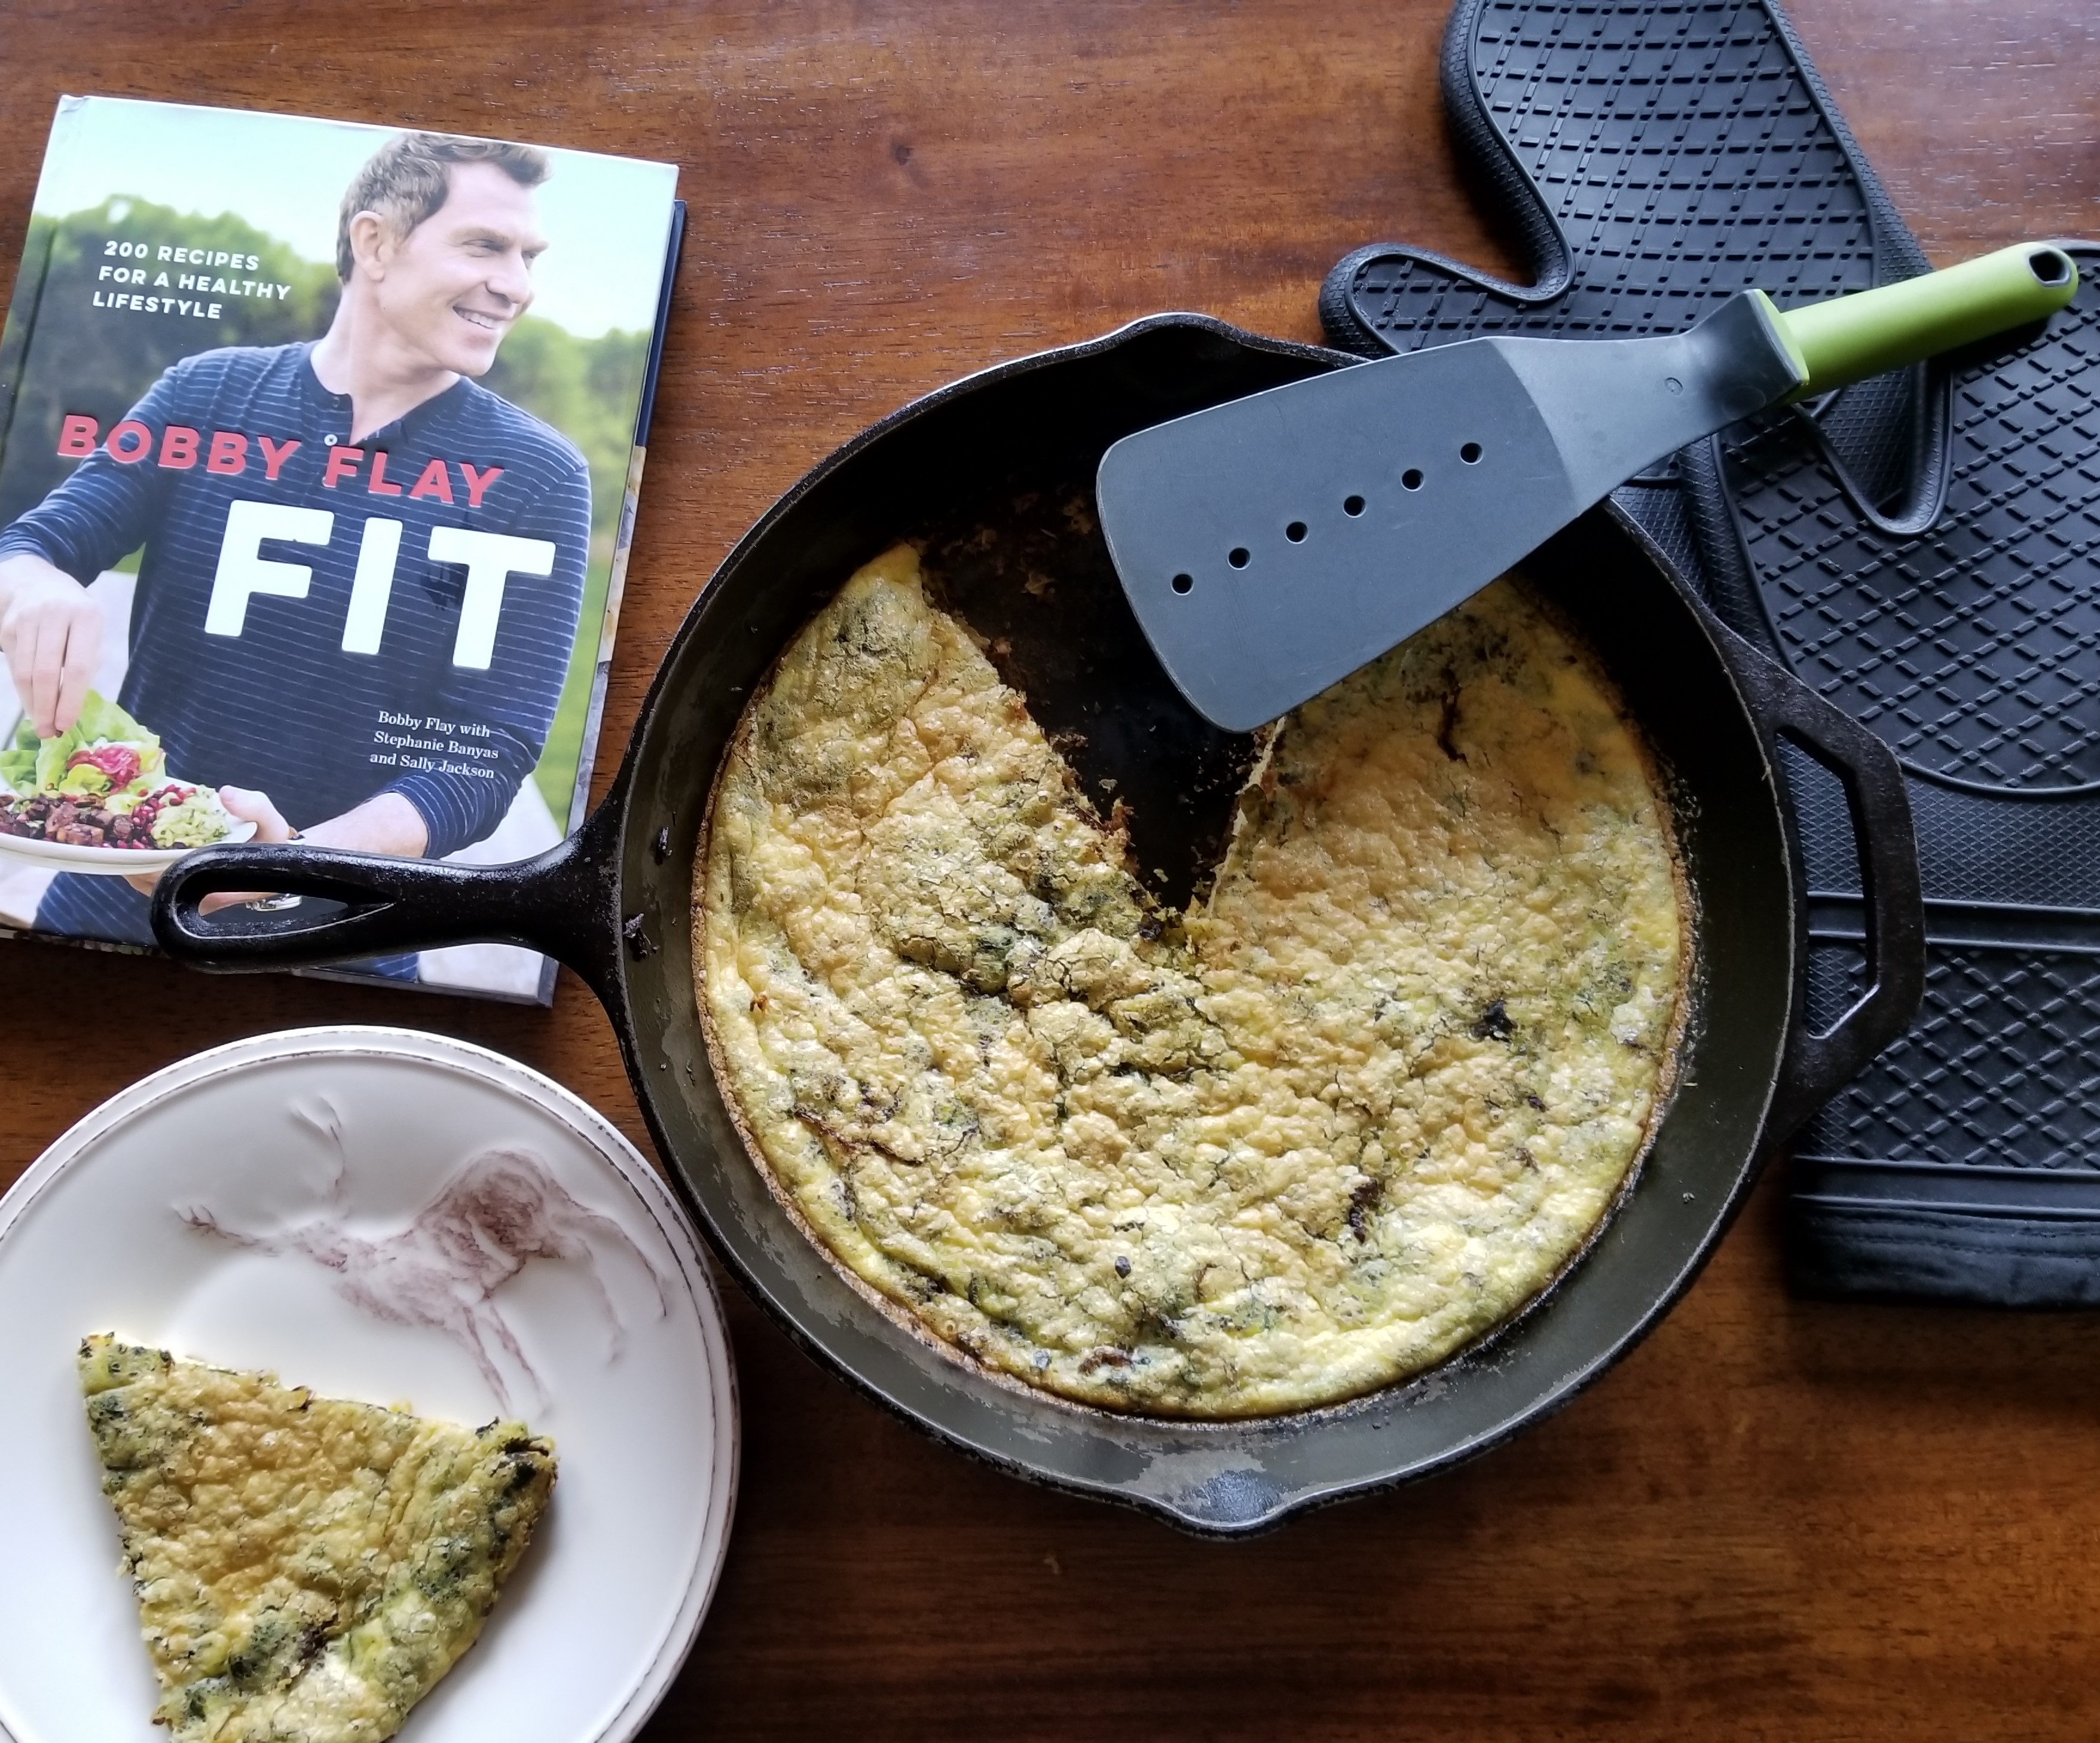 Bobby Flay FIT: 200 Recipes for a Healthy Lifestyle Rural Mom